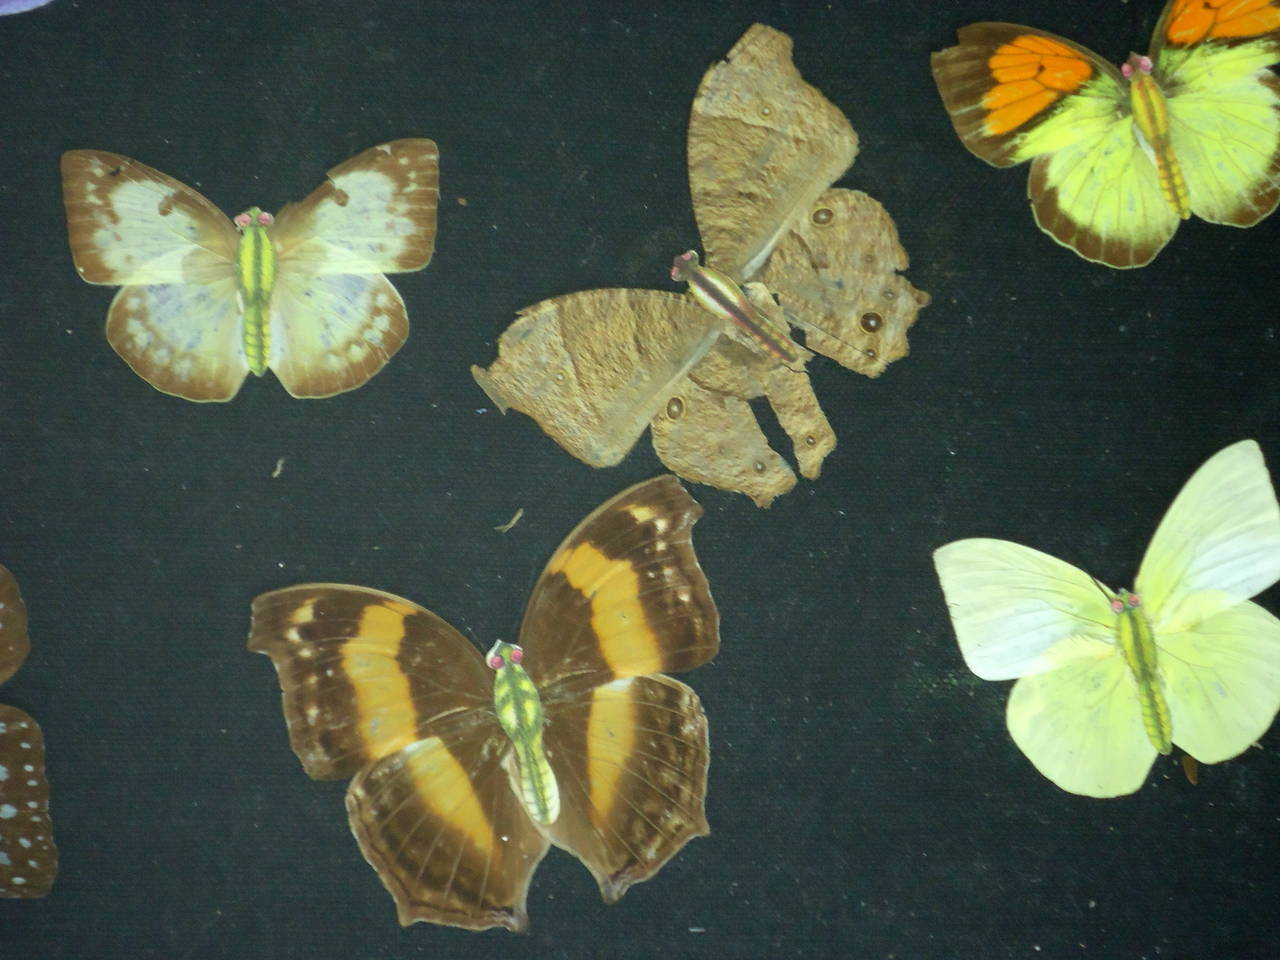 Unusual Japanned specimen display case from the Edwardian era. Displayed on black cloth each butterfly is composed of a paper lithographed body with real butterfly wings. 
In excellent vintage condition with minor issues commiserate with age and